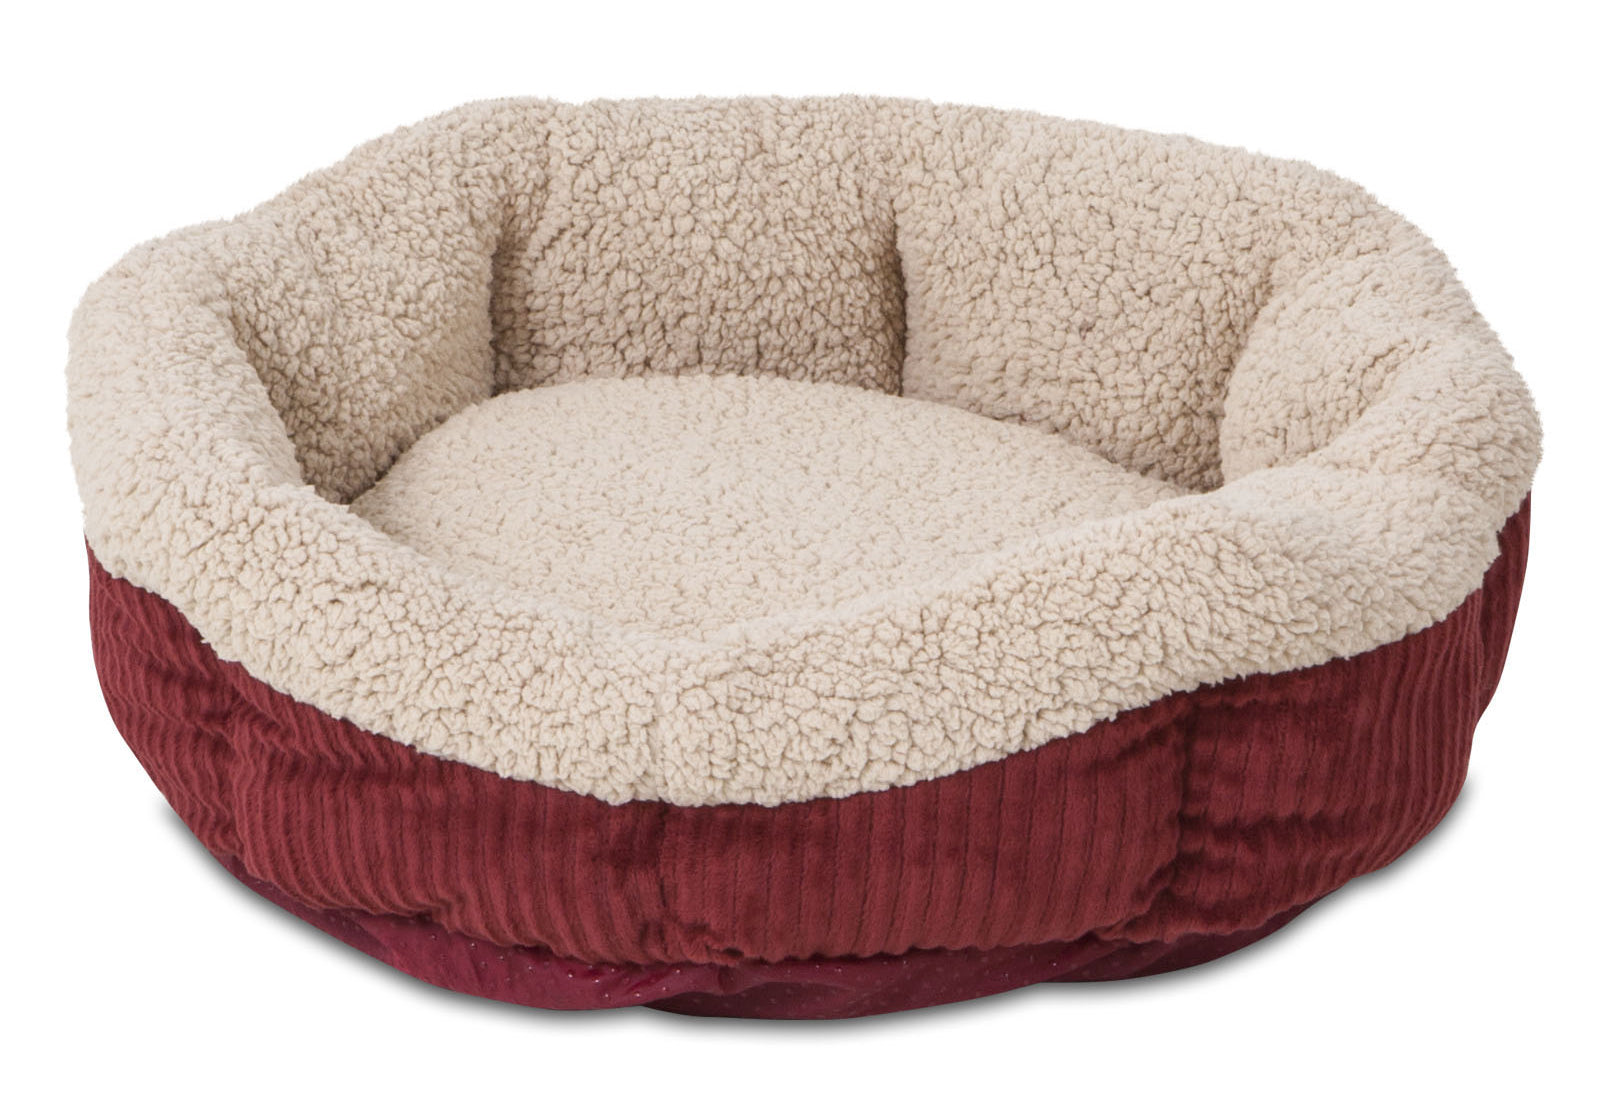 DOSKOCIL MANUFACTURING CO INC, Aspen Pet Barn Red/Cream Faux Lambs Wool Pet Bed 7.00 in. H X 19.5 in. L